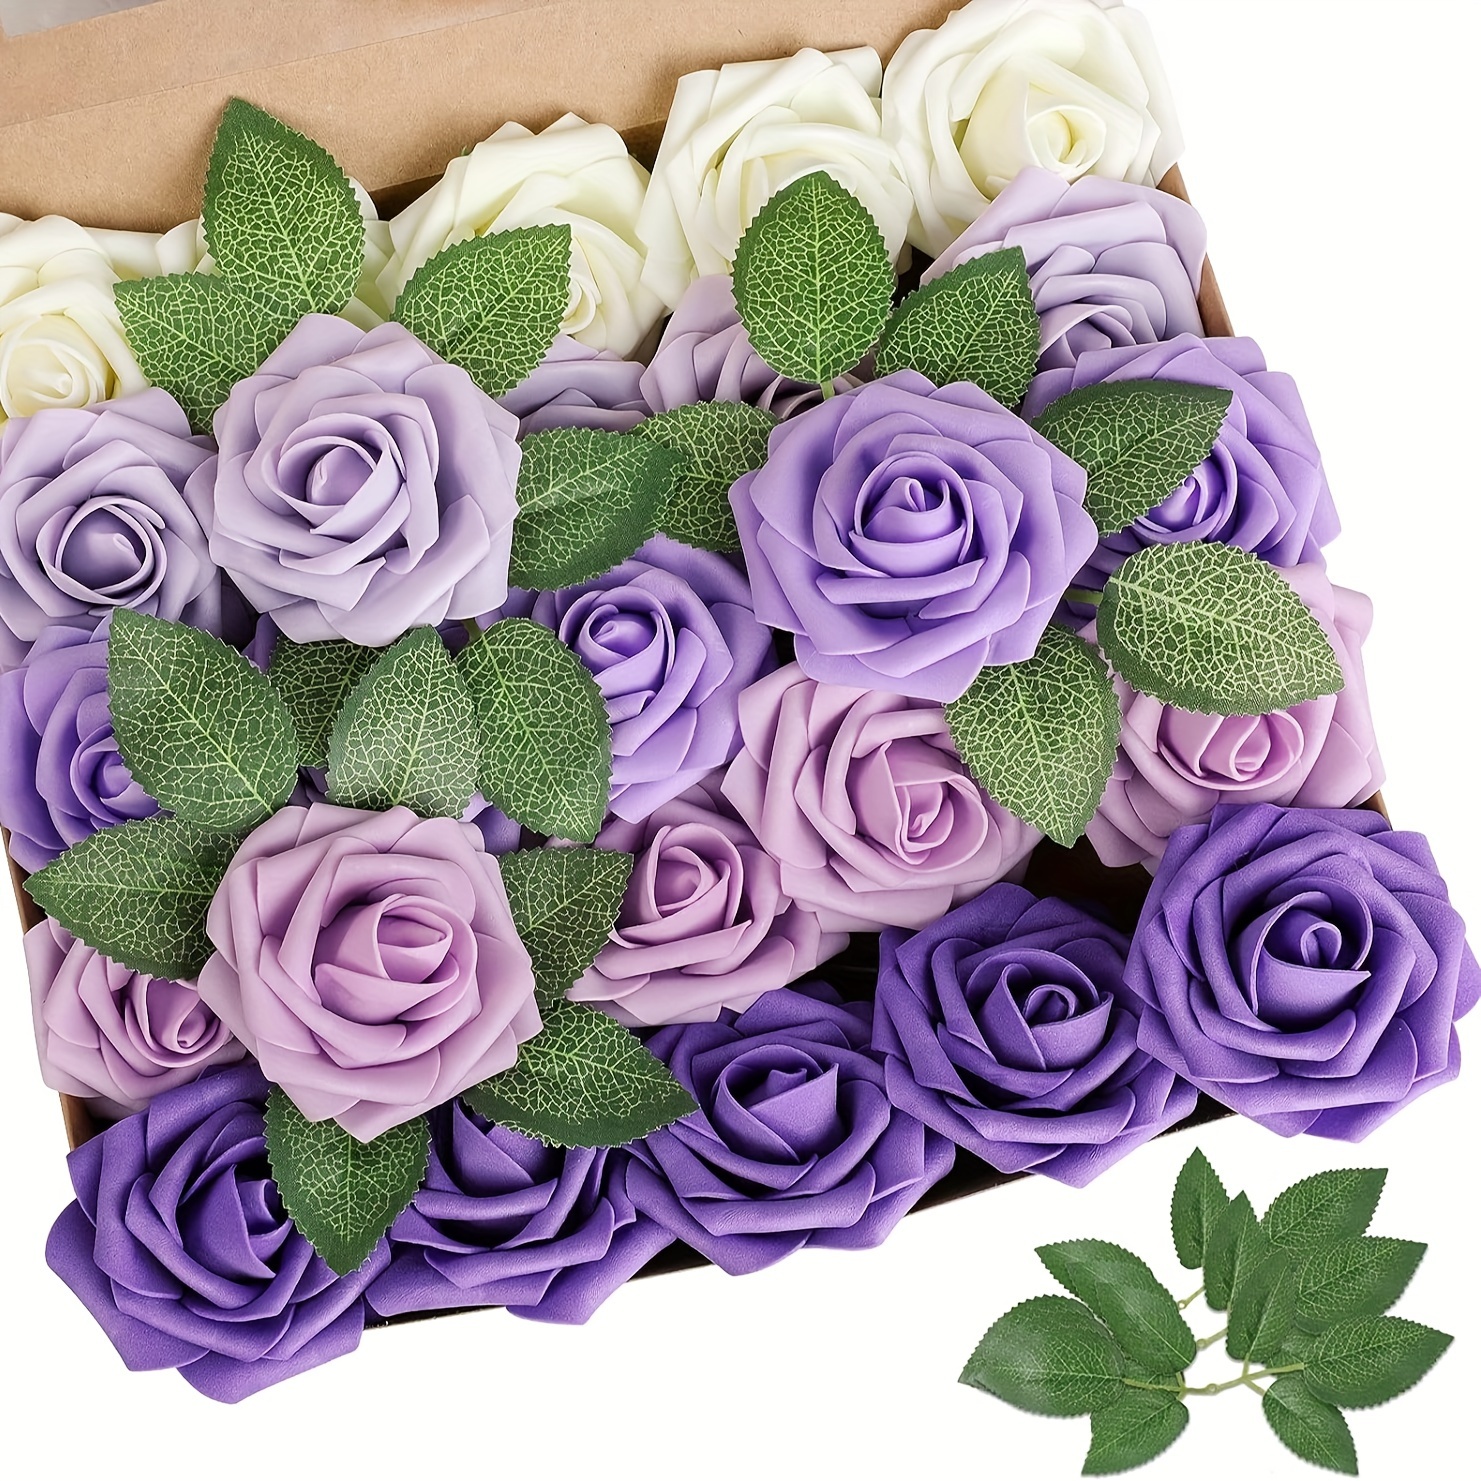 

25pcs Artificial Rose Flower, Gradient Purple Faux Rose Flower Perfect For Mother's Day, Valentine's Day, Hand Bouquet, Diy Wedding, Party, Home Decoration, And Green Plants